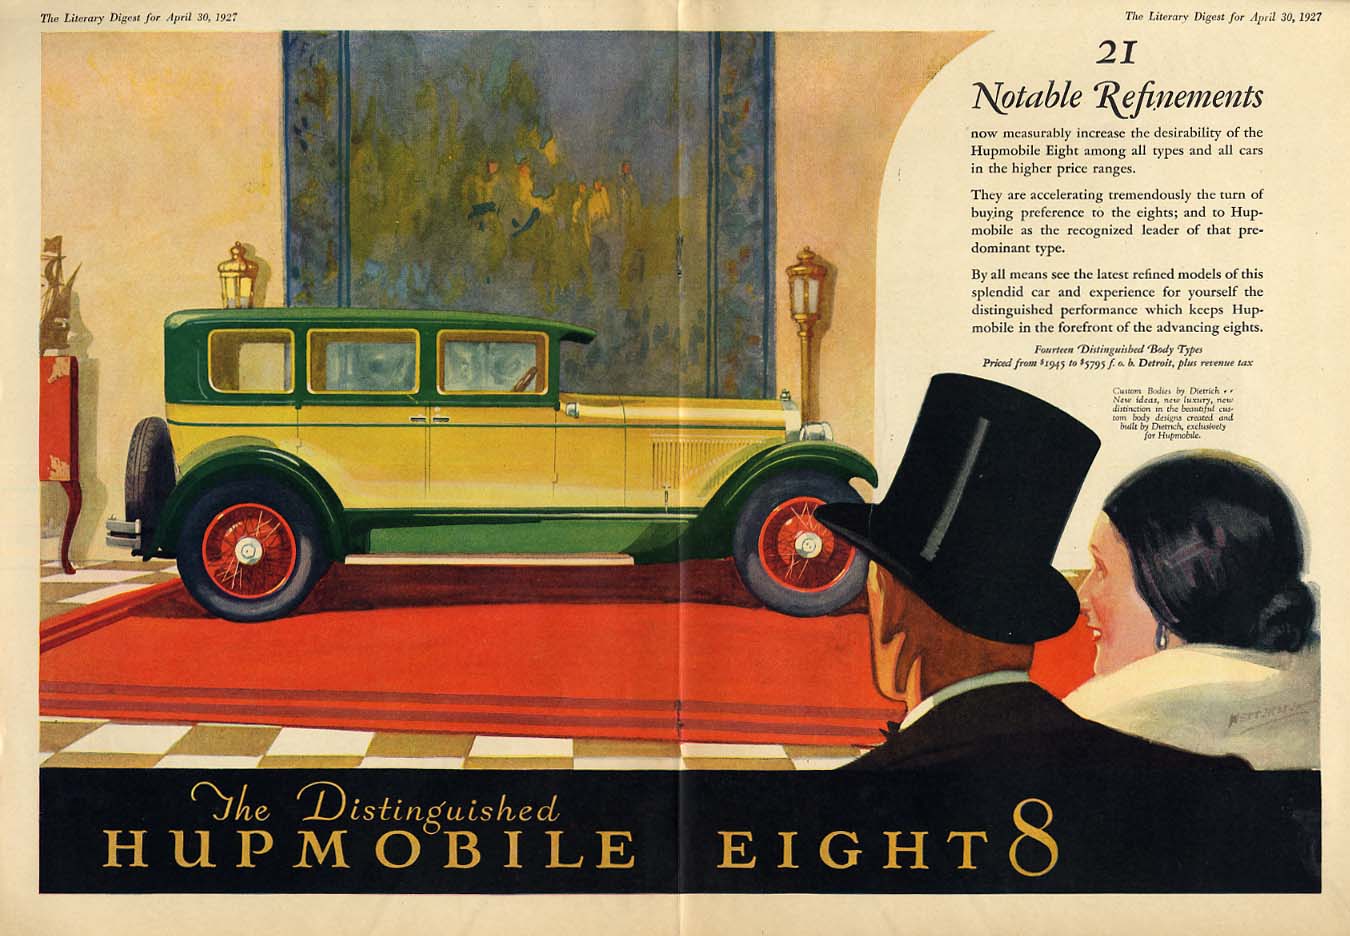 Image for 21 Notable Refinements - The Distinguished Hupmobile ad 1927 LD